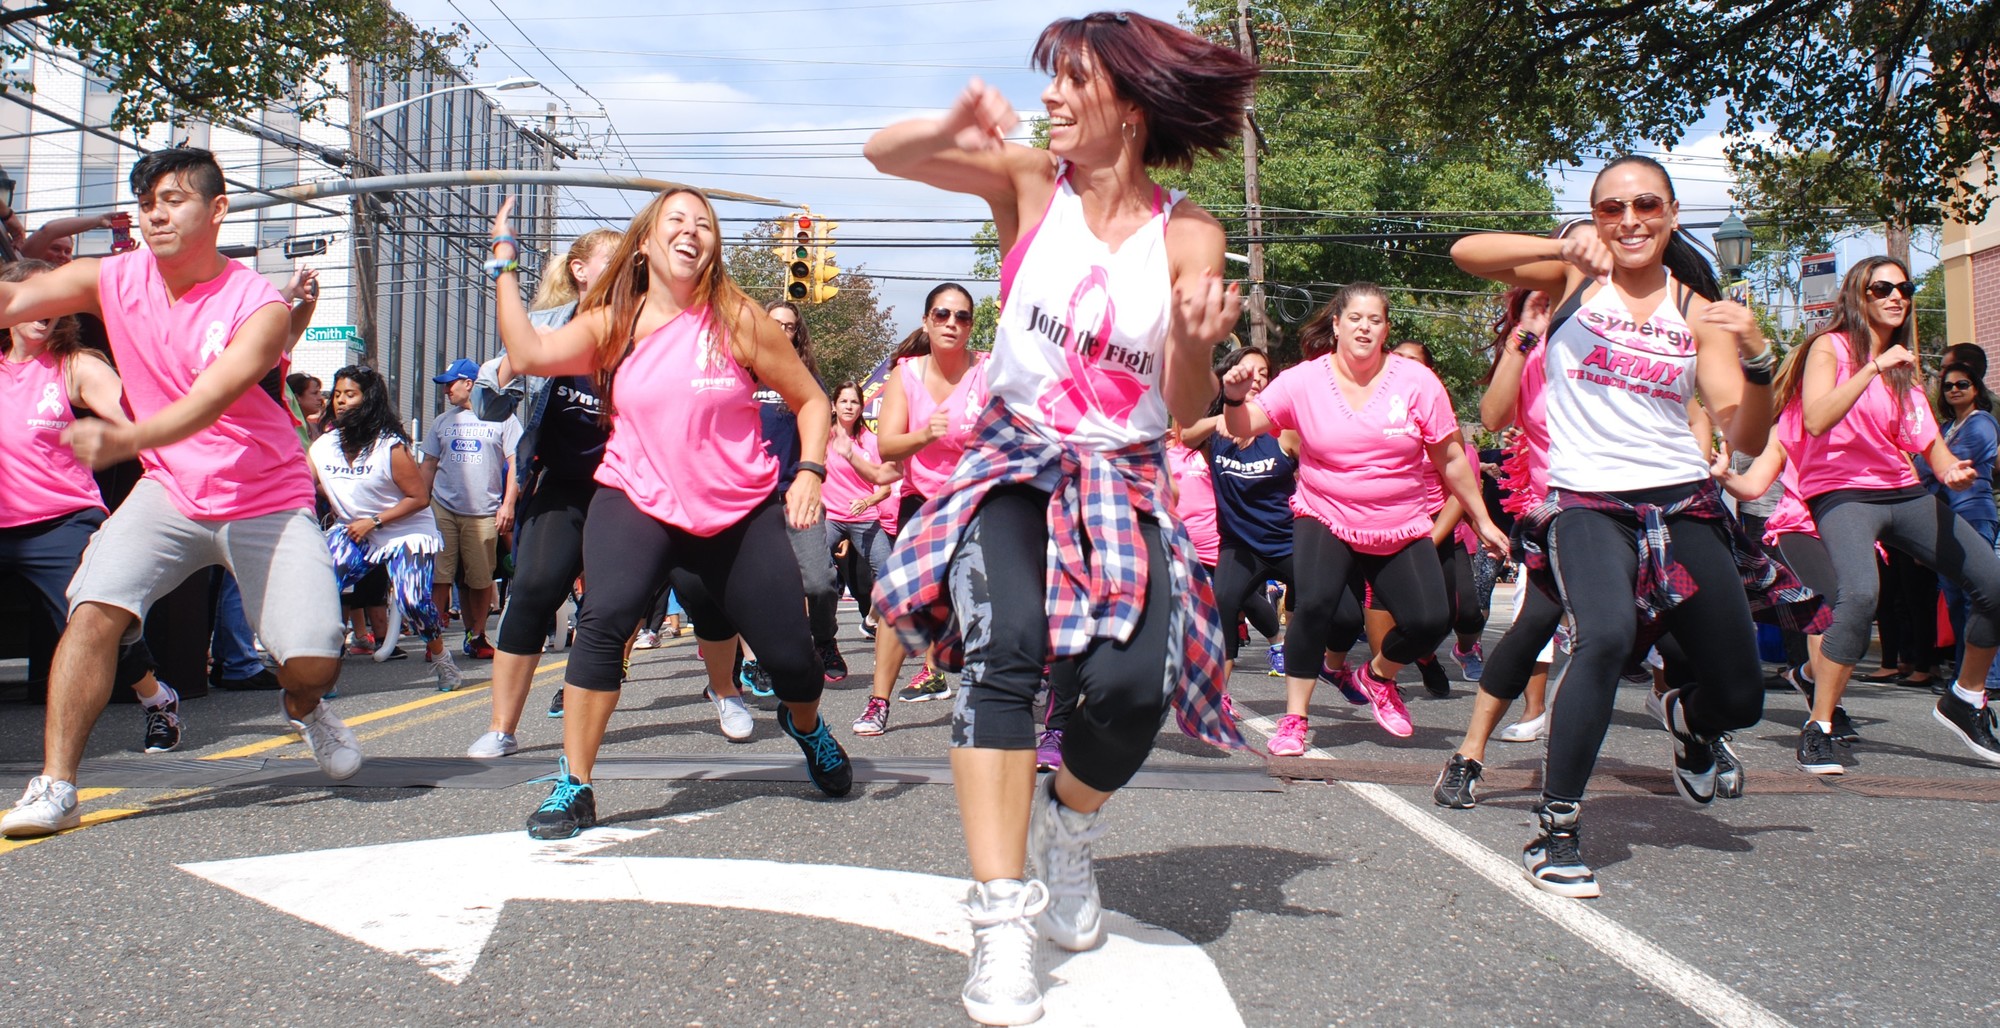 Valerie Sanzone, a trainer and instructor at Synergy Fitness in Merrick, led a flash mob of dancers last Sunday on Merrick Avenue at the Merrick Fall Festival, which was sponsored by the Chamber of Commerce. The festival attracted thousands of fair-goers from Sept. 25 to 27.